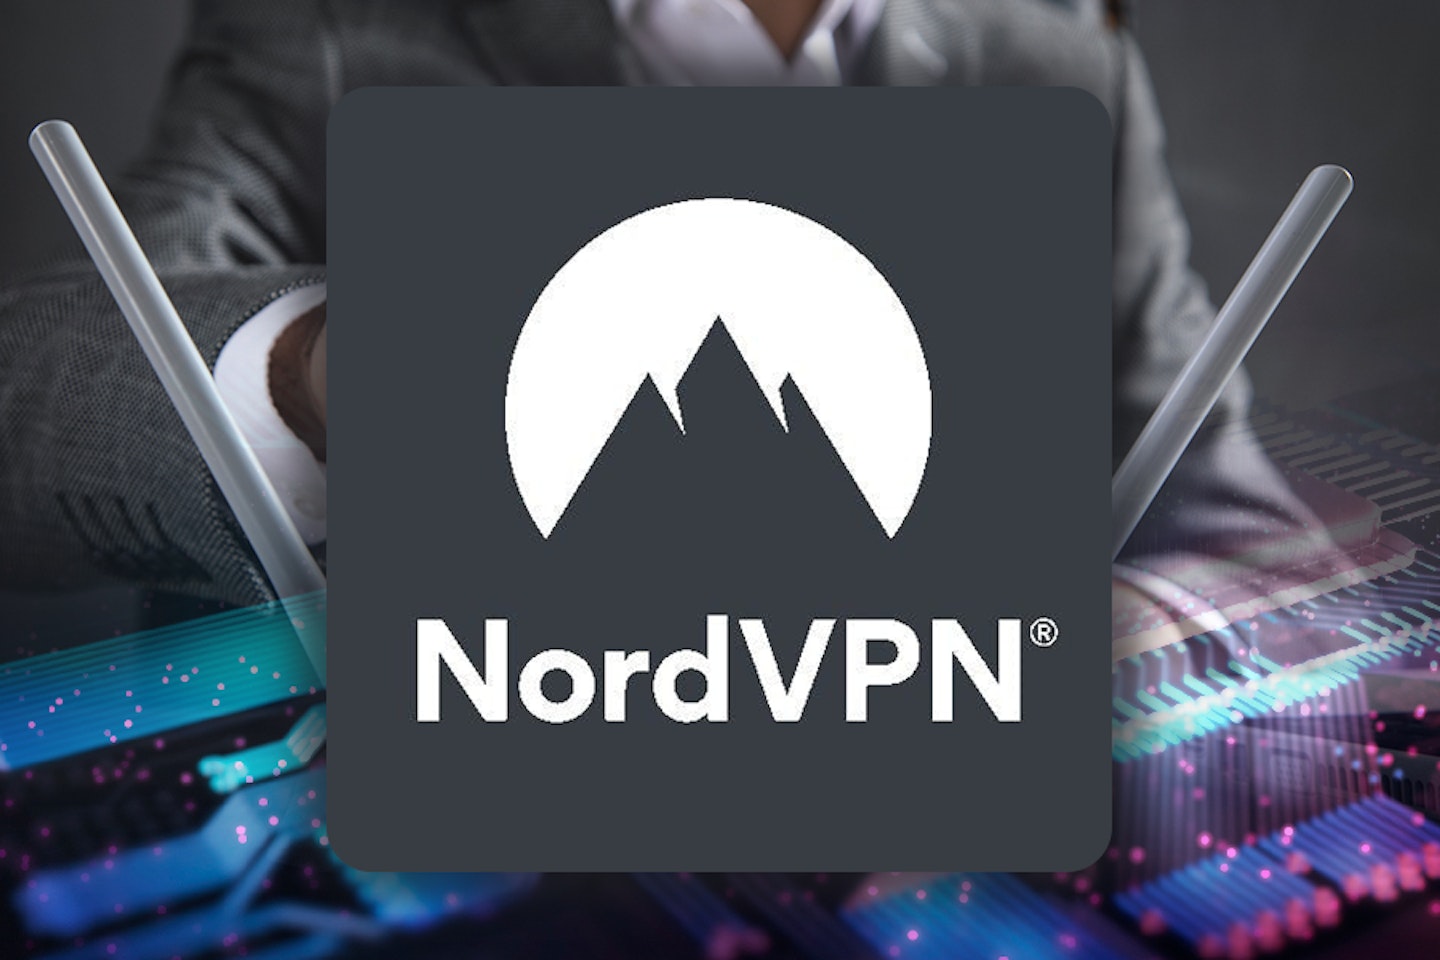 NordVPN - possibly the best router VPN